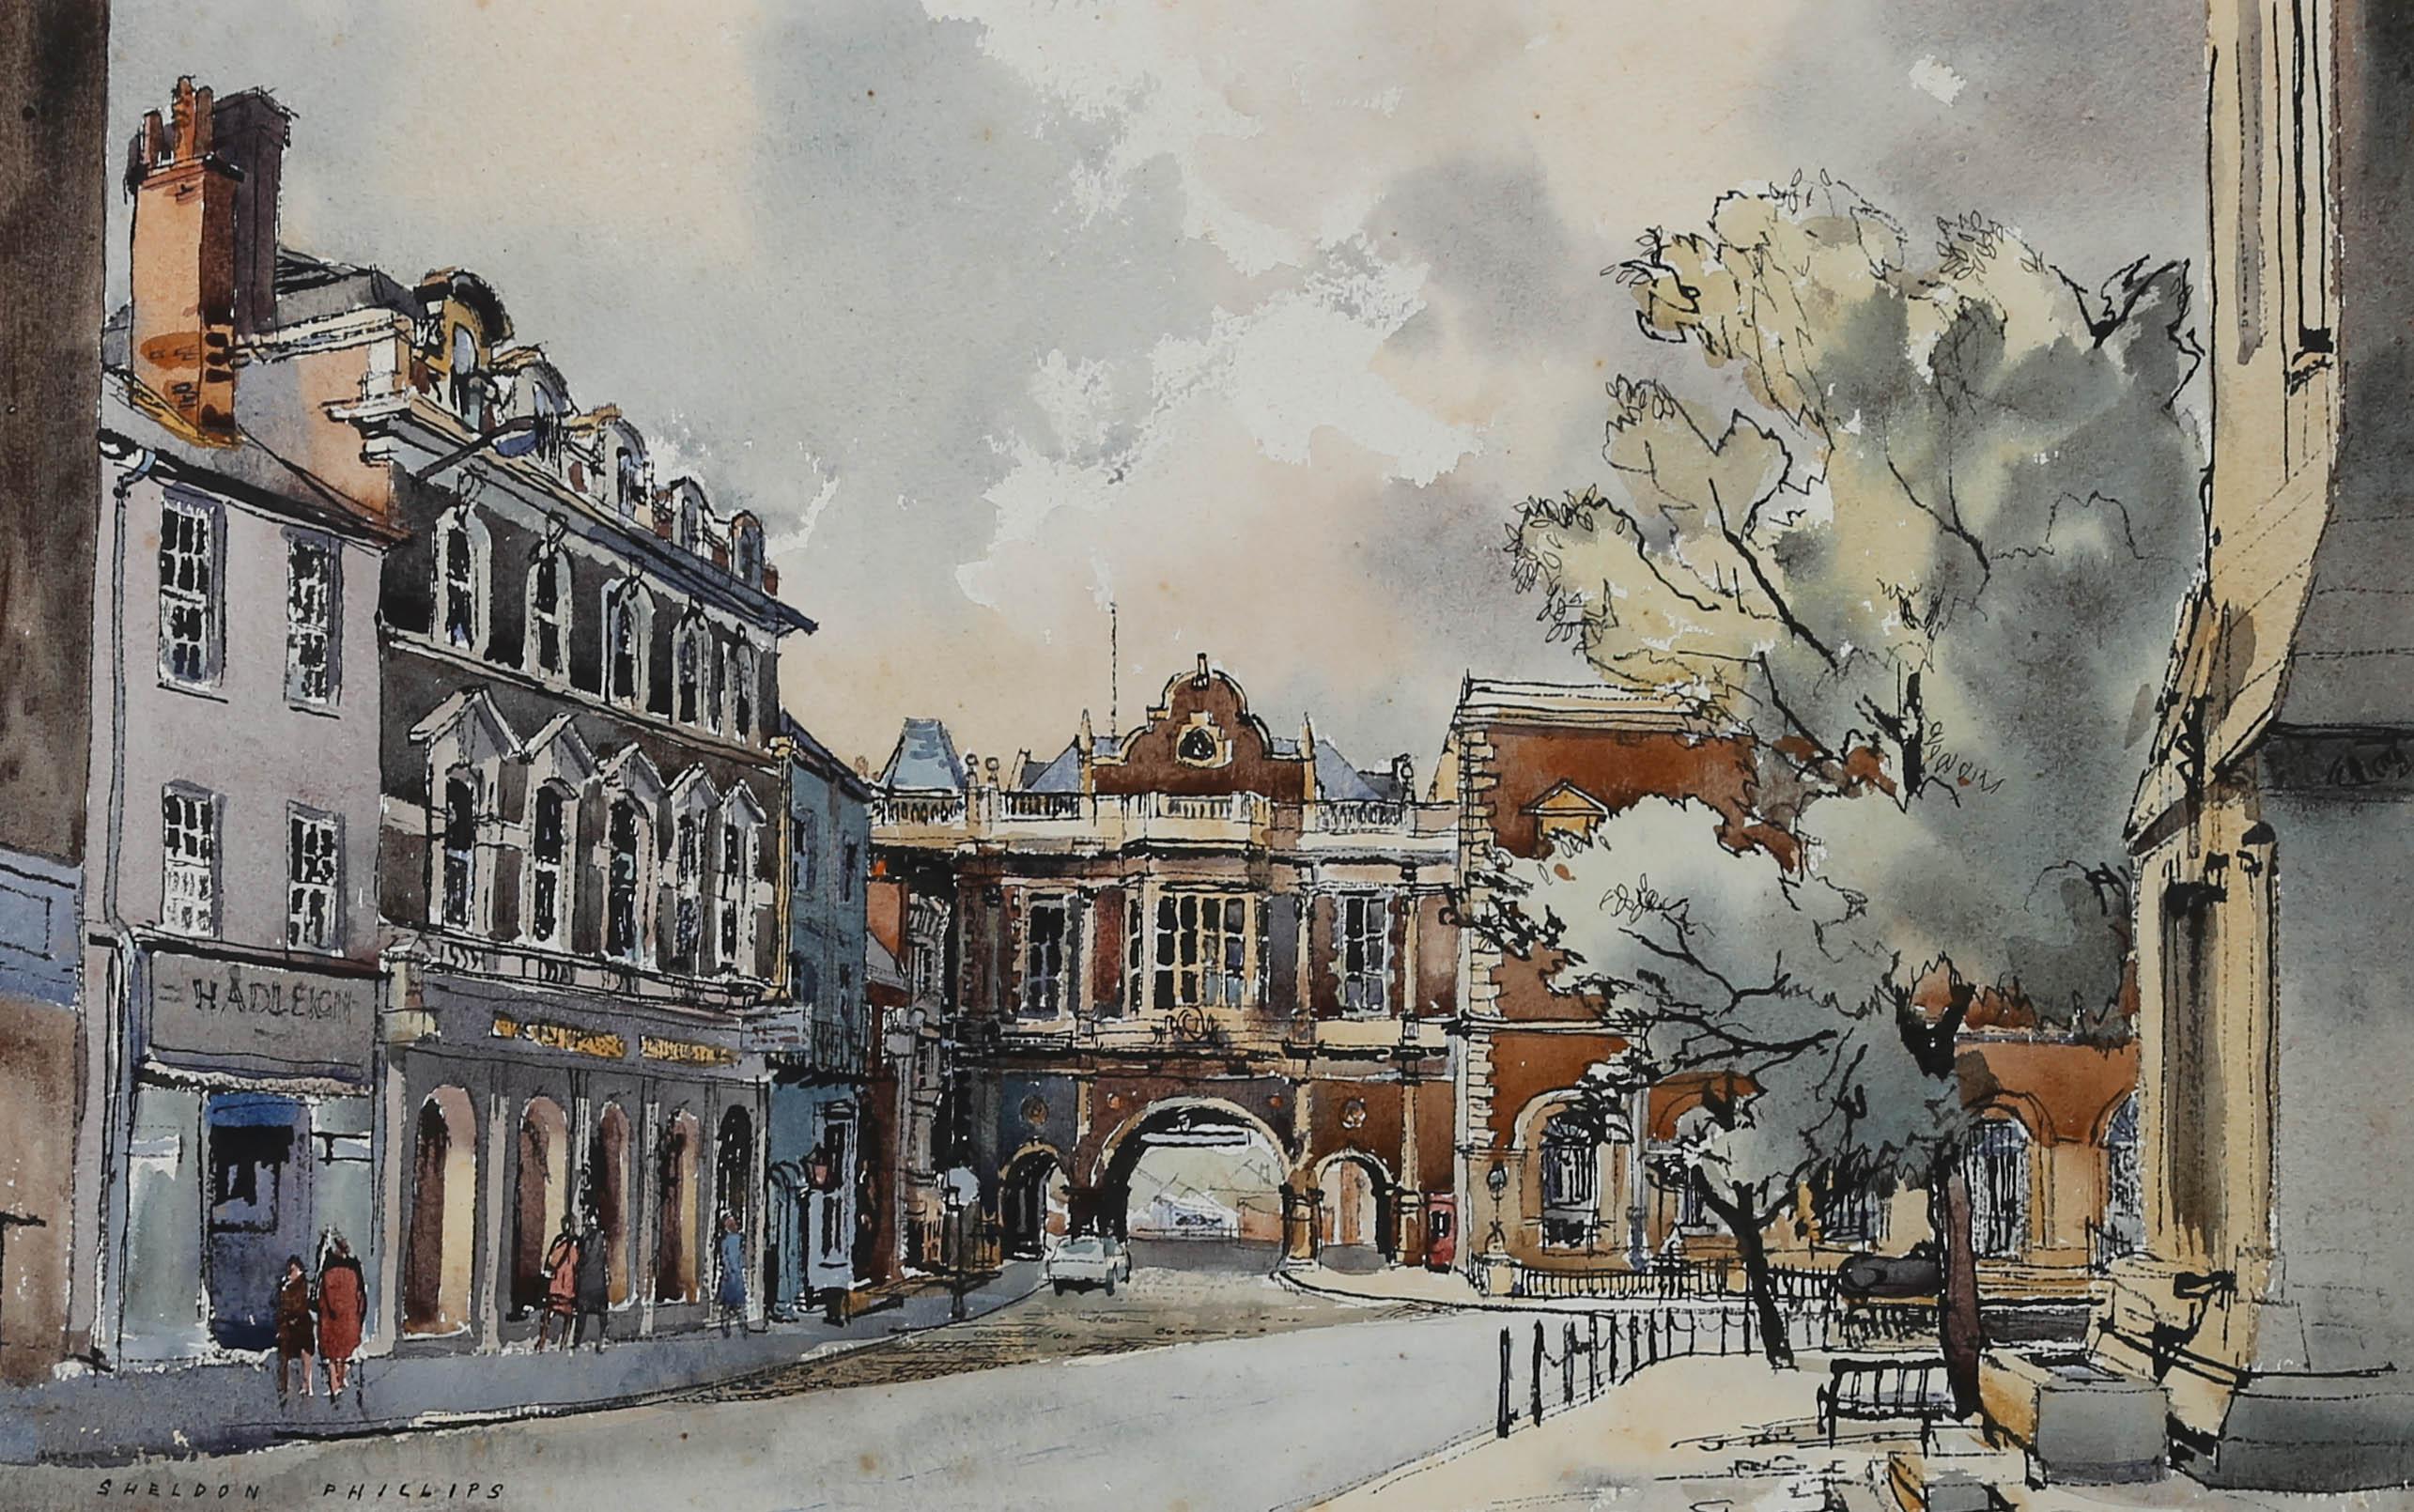 A colourful and detailed watercolour composition of a street scene by artist Sheldon Phillips. Figures can be seen window shopping along a picturesque high street. Signed in the watercolour. Presented in a cream mount and glazed gilt effect frame.